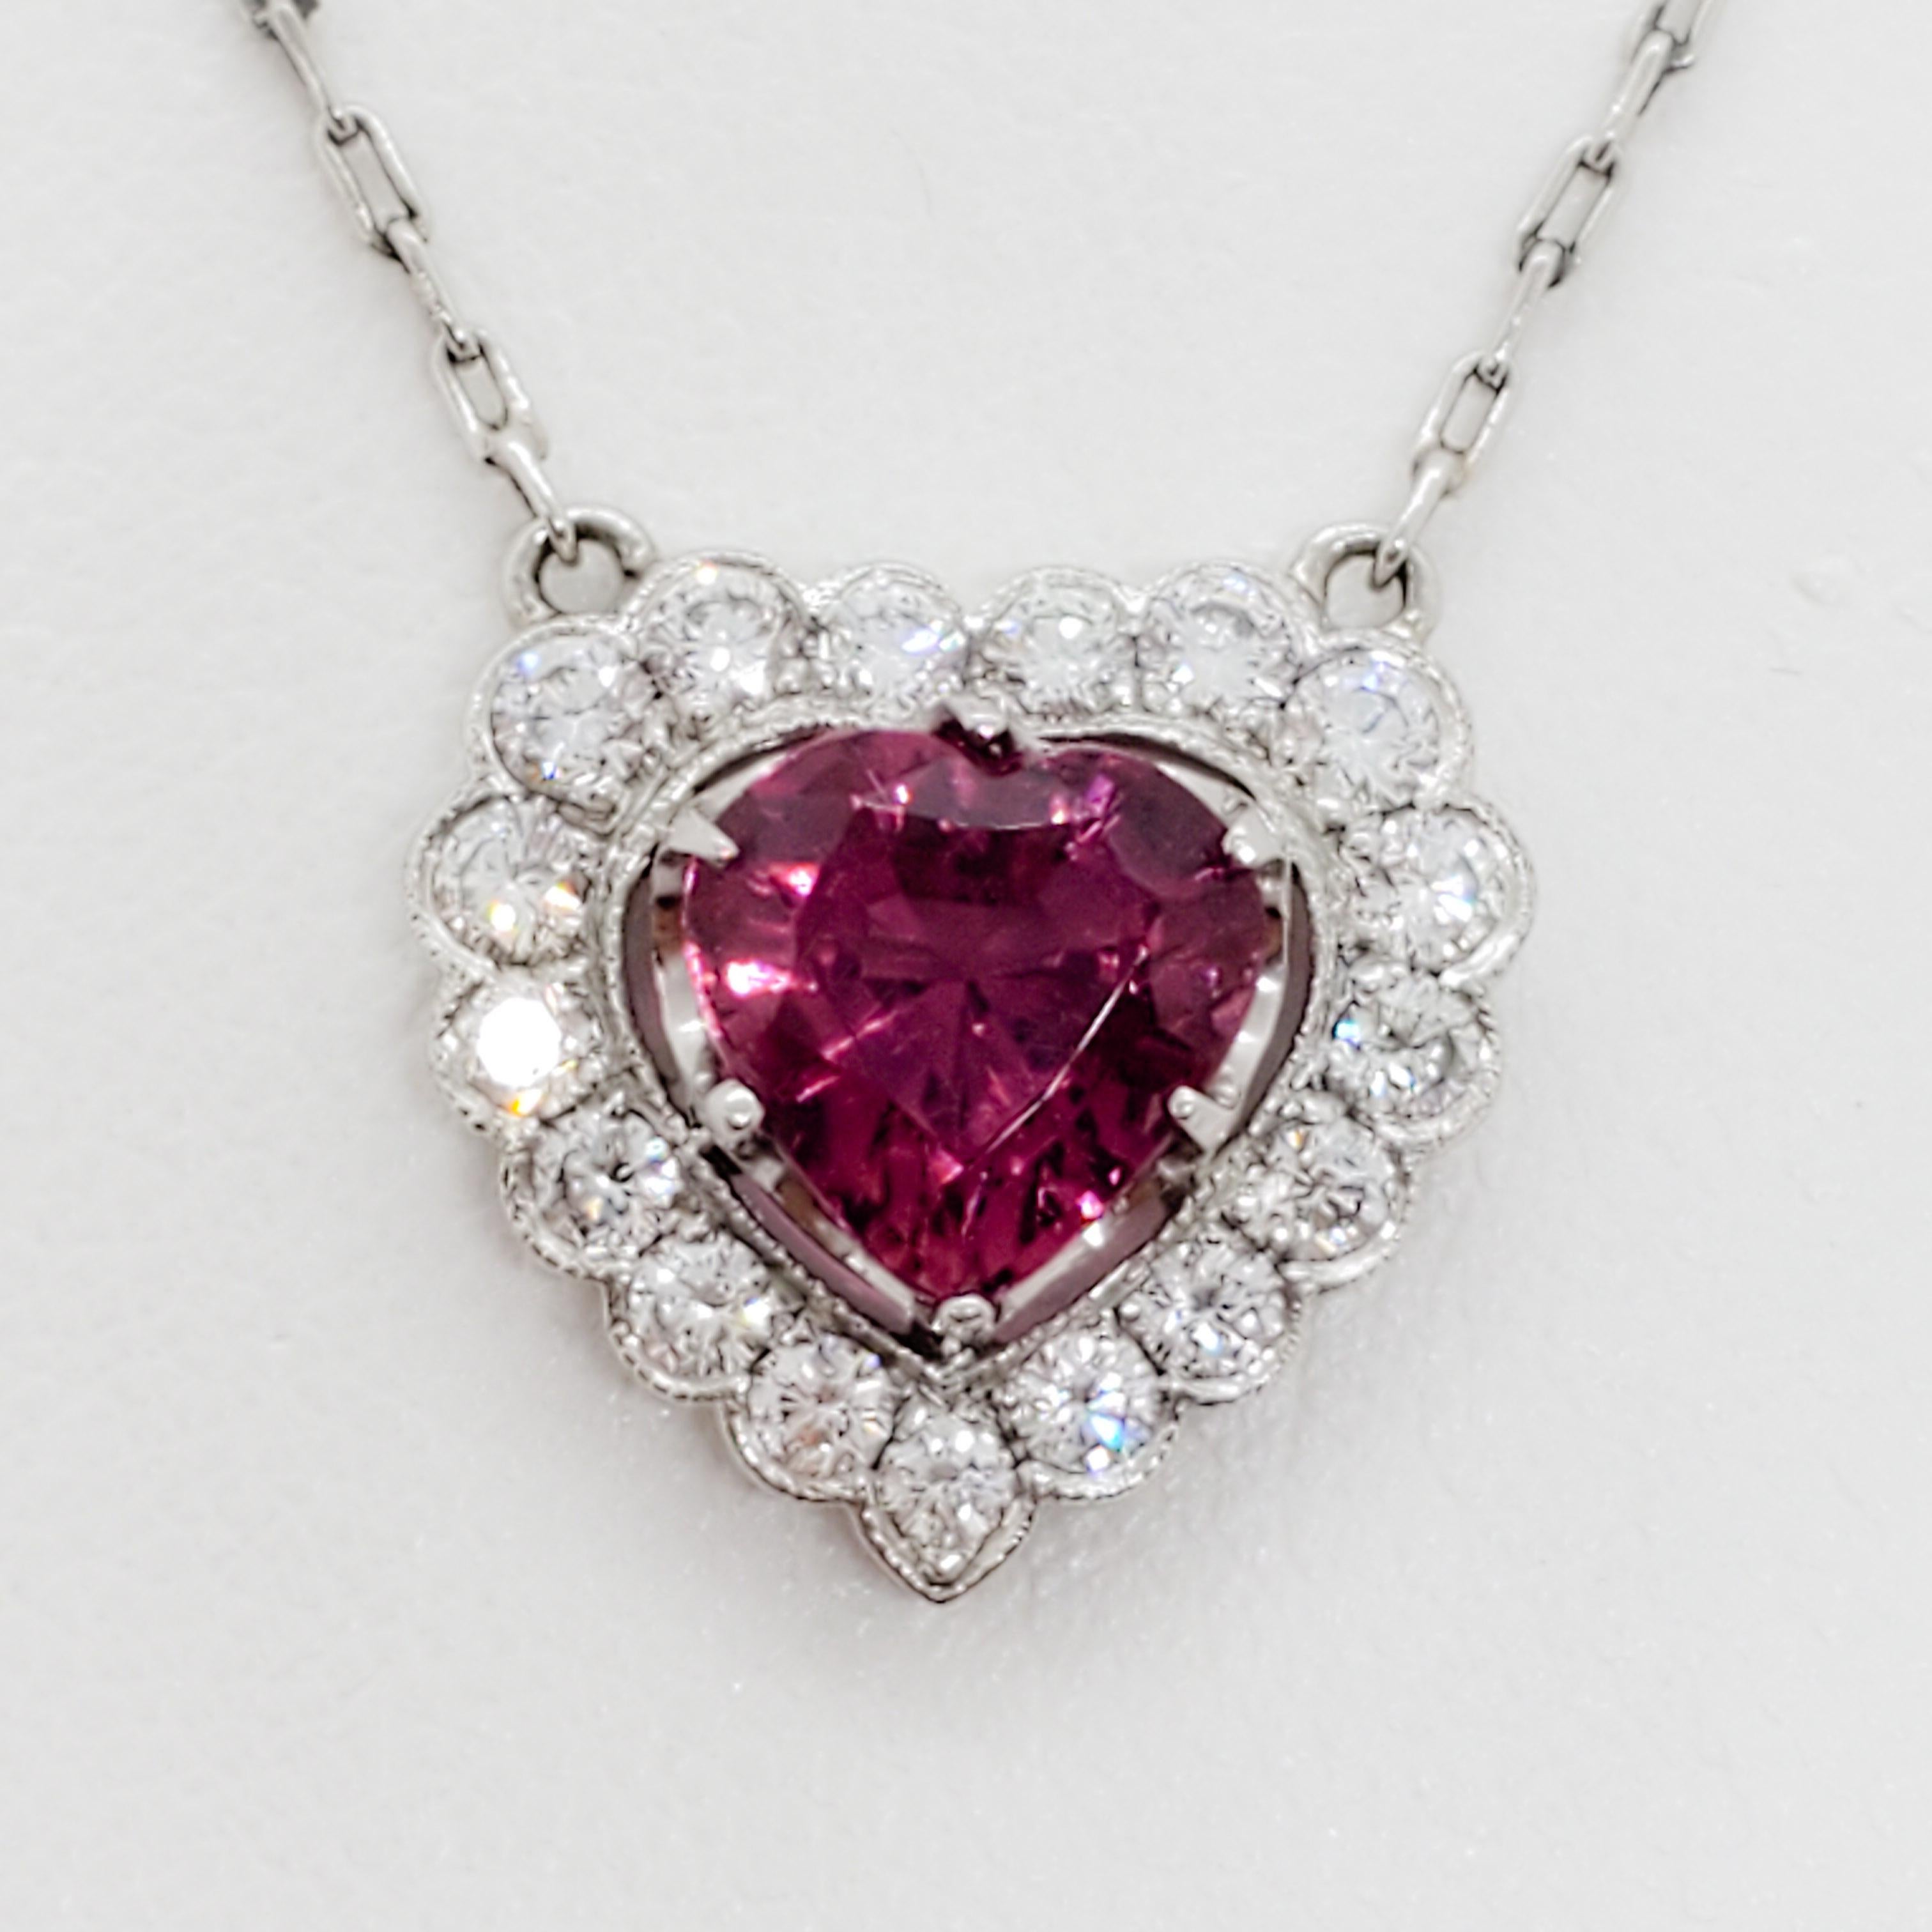 Gorgeous raspberry red tourmaline heart shape weighing 2.10 ct. with 1.25 ct. good quality white diamond rounds.  Handmade platinum mounting and chain.  